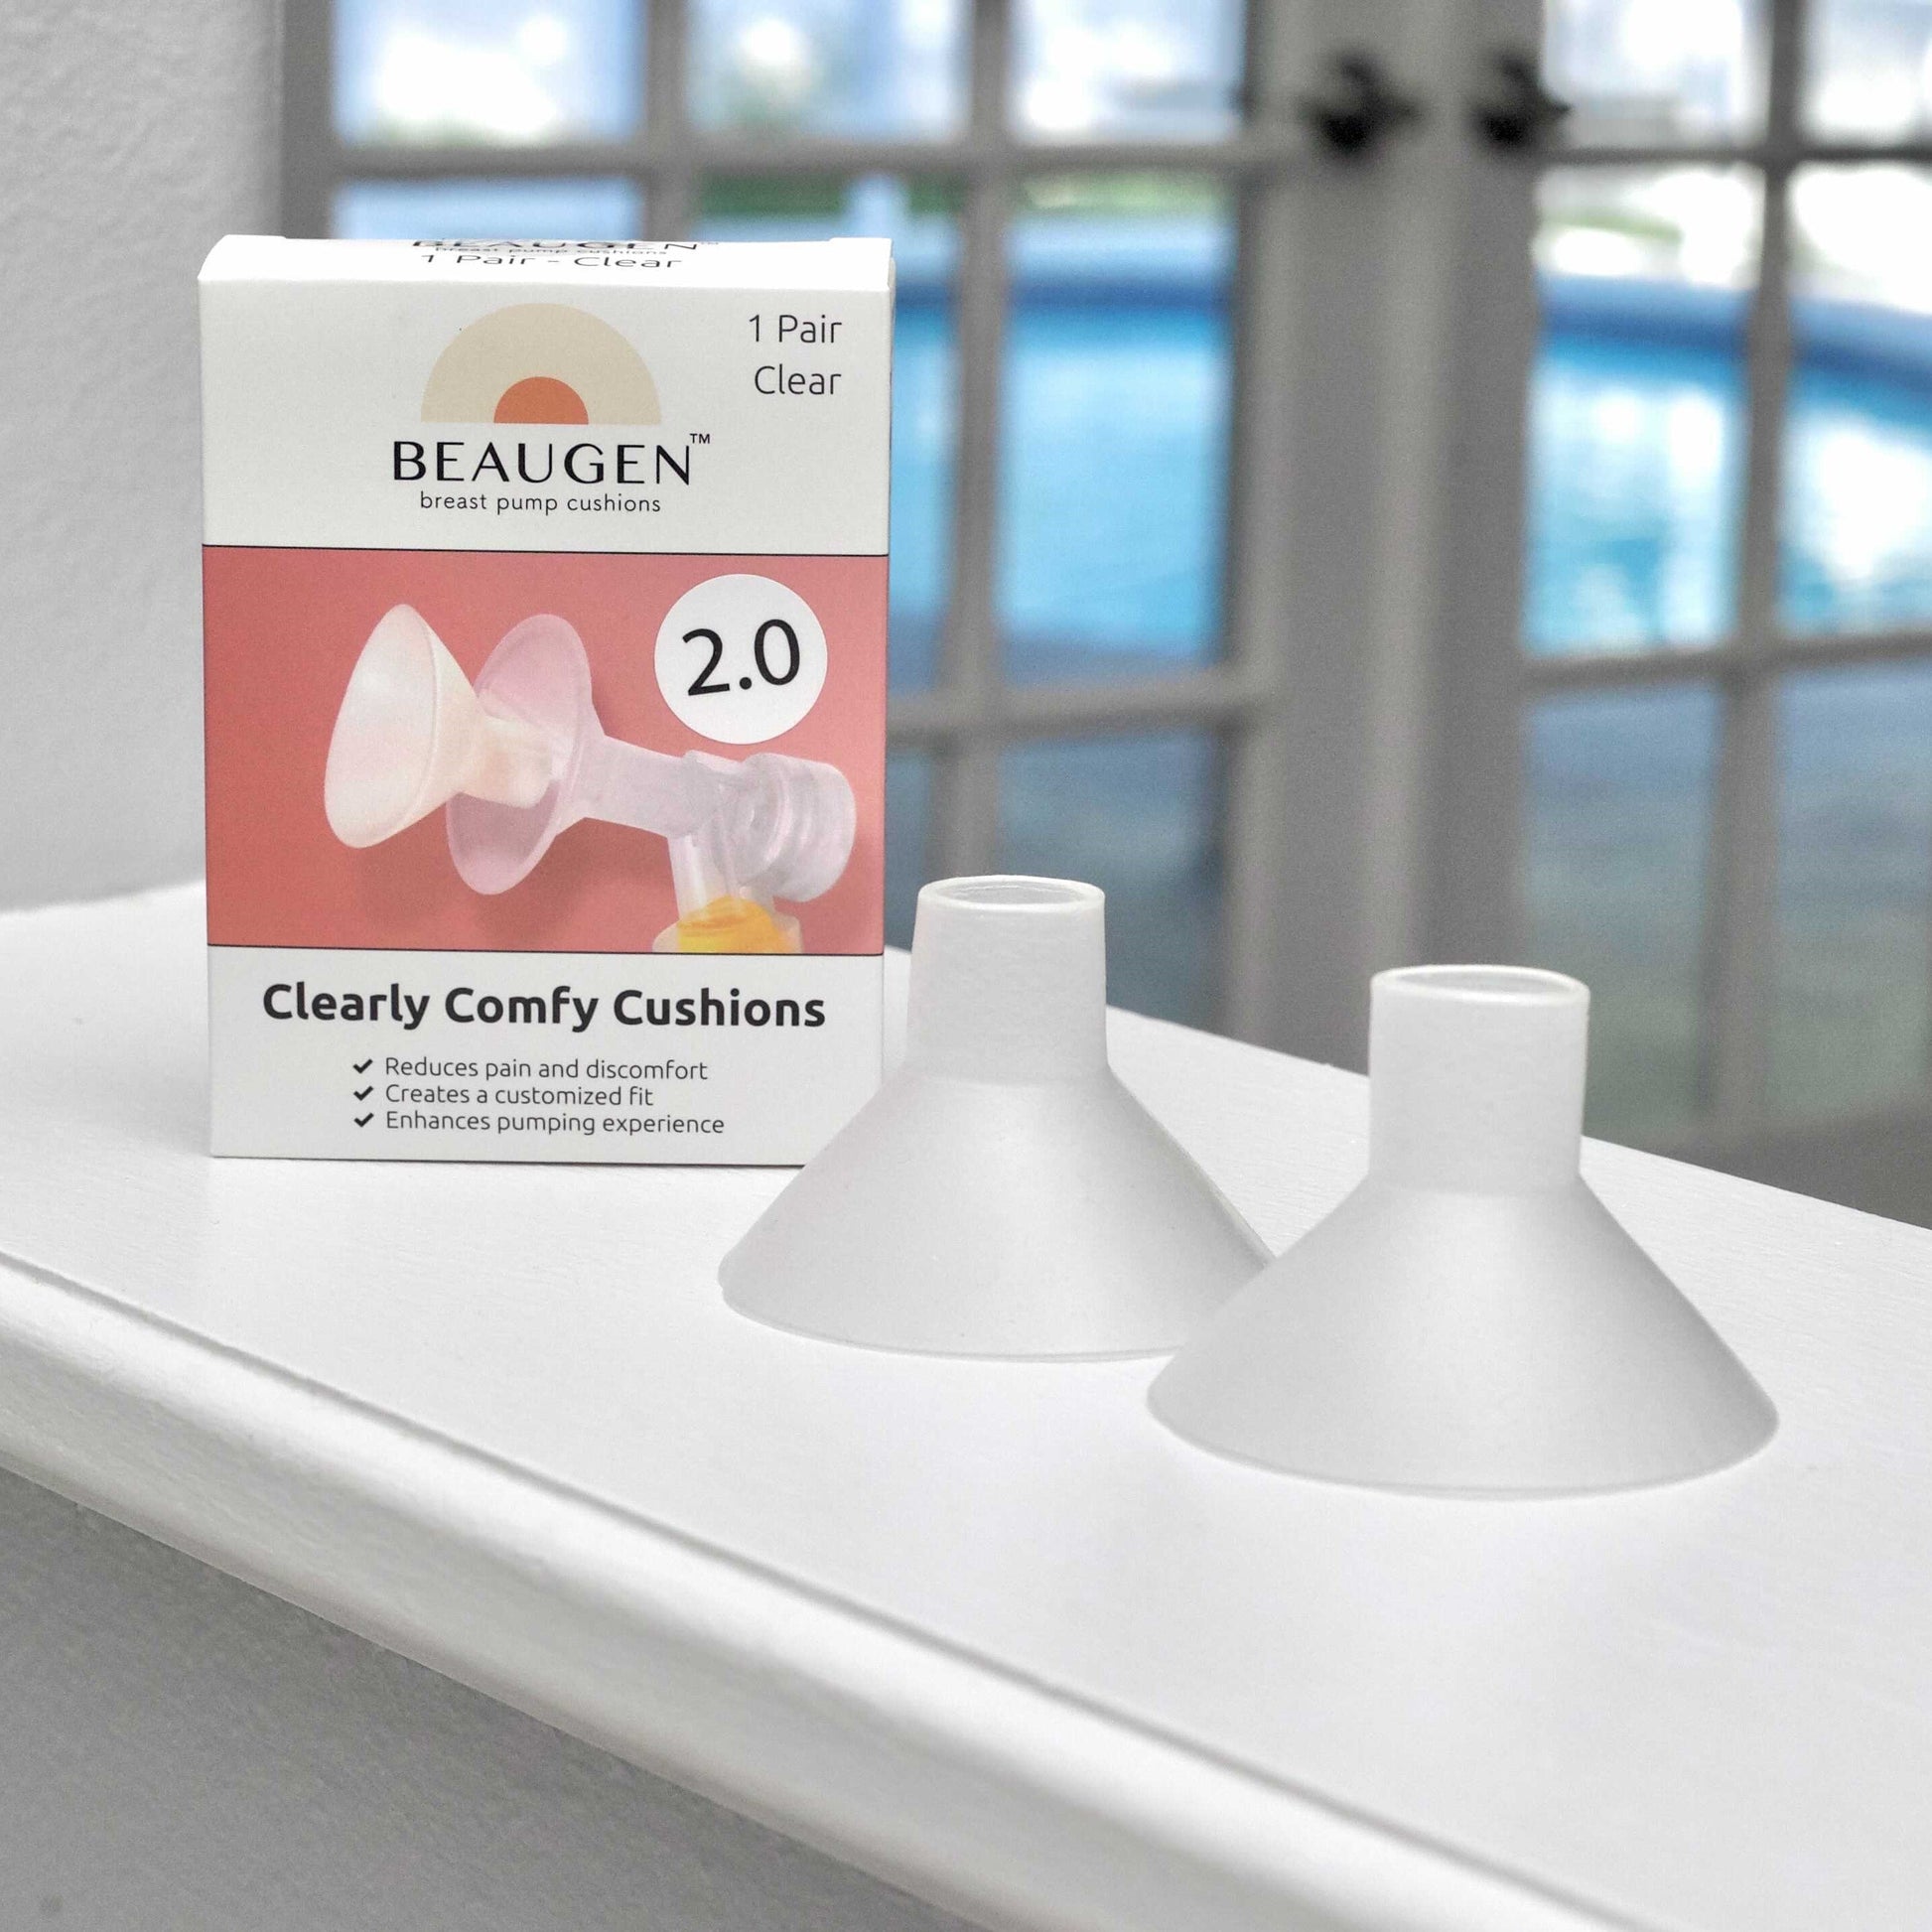 BeauGen's Patent Pending Breast Pump Cushions are soft and flexible pain relieving flange inserts that come in convenient two packs.